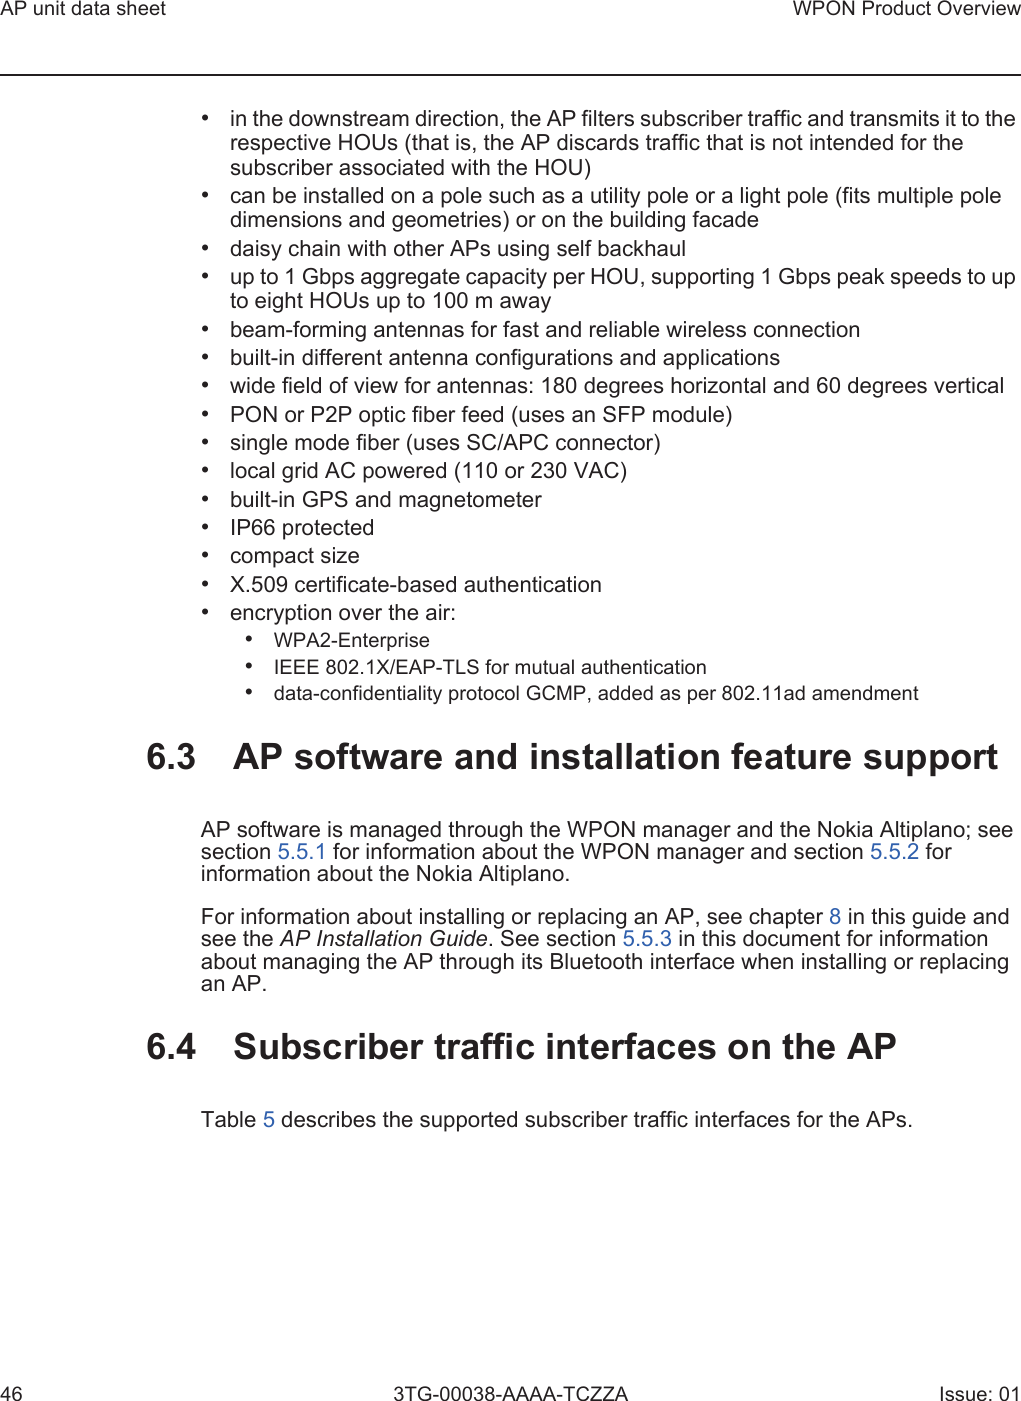 AP unit data sheet46WPON Product Overview3TG-00038-AAAA-TCZZA Issue: 01•in the downstream direction, the AP filters subscriber traffic and transmits it to therespective HOUs (that is, the AP discards traffic that is not intended for thesubscriber associated with the HOU)•can be installed on a pole such as a utility pole or a light pole (fits multiple poledimensions and geometries) or on the building facade•daisy chain with other APs using self backhaul•up to 1 Gbps aggregate capacity per HOU, supporting 1 Gbps peak speeds to upto eight HOUs up to 100 m away•beam-forming antennas for fast and reliable wireless connection•built-in different antenna configurations and applications•wide field of view for antennas: 180 degrees horizontal and 60 degrees vertical•PON or P2P optic fiber feed (uses an SFP module)•single mode fiber (uses SC/APC connector)•local grid AC powered (110 or 230 VAC)•built-in GPS and magnetometer•IP66 protected•compact size•X.509 certificate-based authentication•encryption over the air:•WPA2-Enterprise•IEEE 802.1X/EAP-TLS for mutual authentication•data-confidentiality protocol GCMP, added as per 802.11ad amendment6.3 AP software and installation feature supportAP software is managed through the WPON manager and the Nokia Altiplano; see section 5.5.1 for information about the WPON manager and section 5.5.2 for information about the Nokia Altiplano.For information about installing or replacing an AP, see chapter 8 in this guide and see the AP Installation Guide. See section 5.5.3 in this document for information about managing the AP through its Bluetooth interface when installing or replacing an AP.6.4 Subscriber traffic interfaces on the APTable 5 describes the supported subscriber traffic interfaces for the APs. 